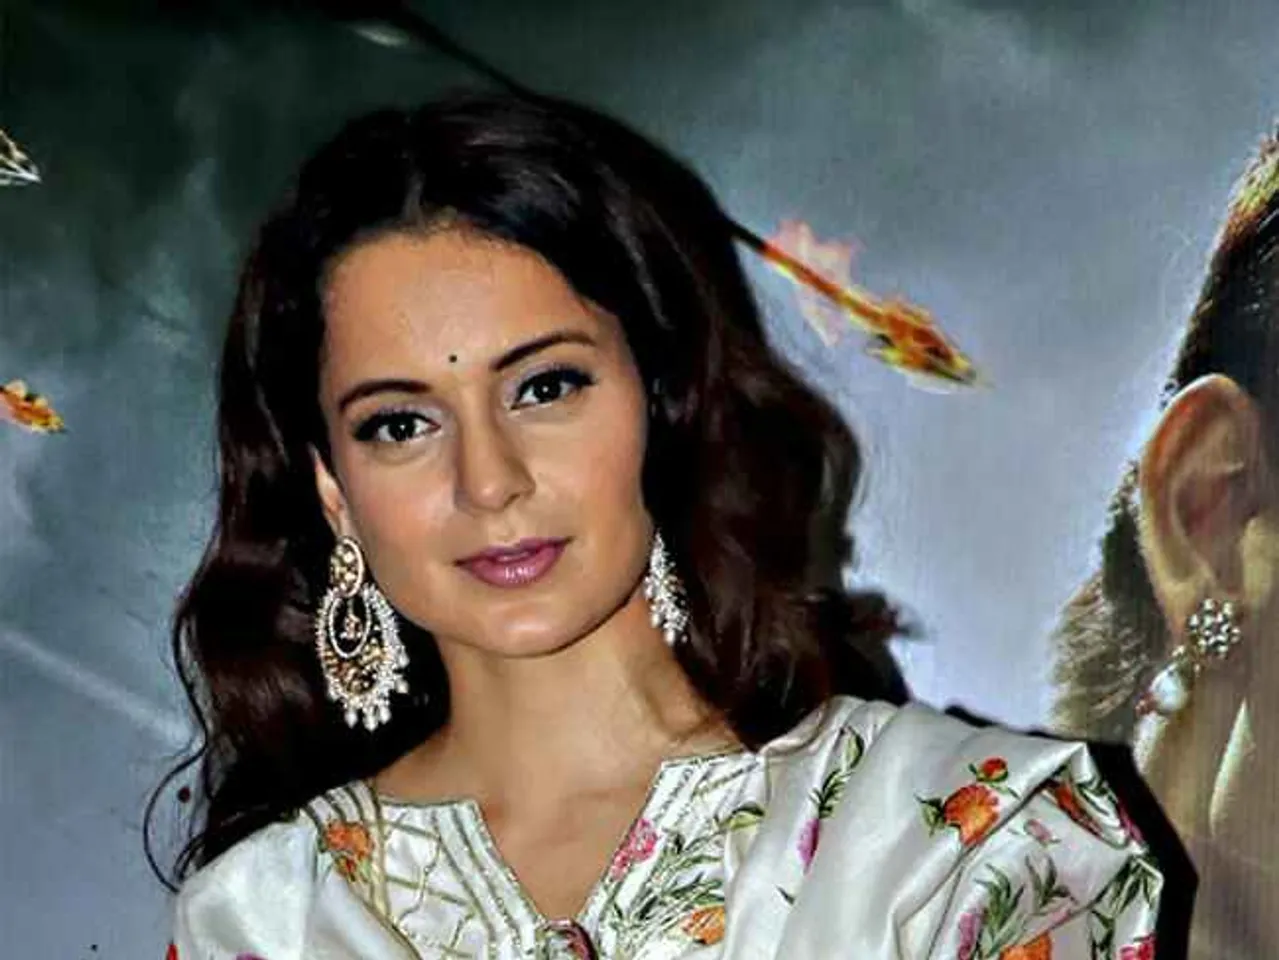 Bandra Court Orders FIR Against Kangana Ranaut And Her Sister Rangoli Chandel For Spreading "Communal Hatred"